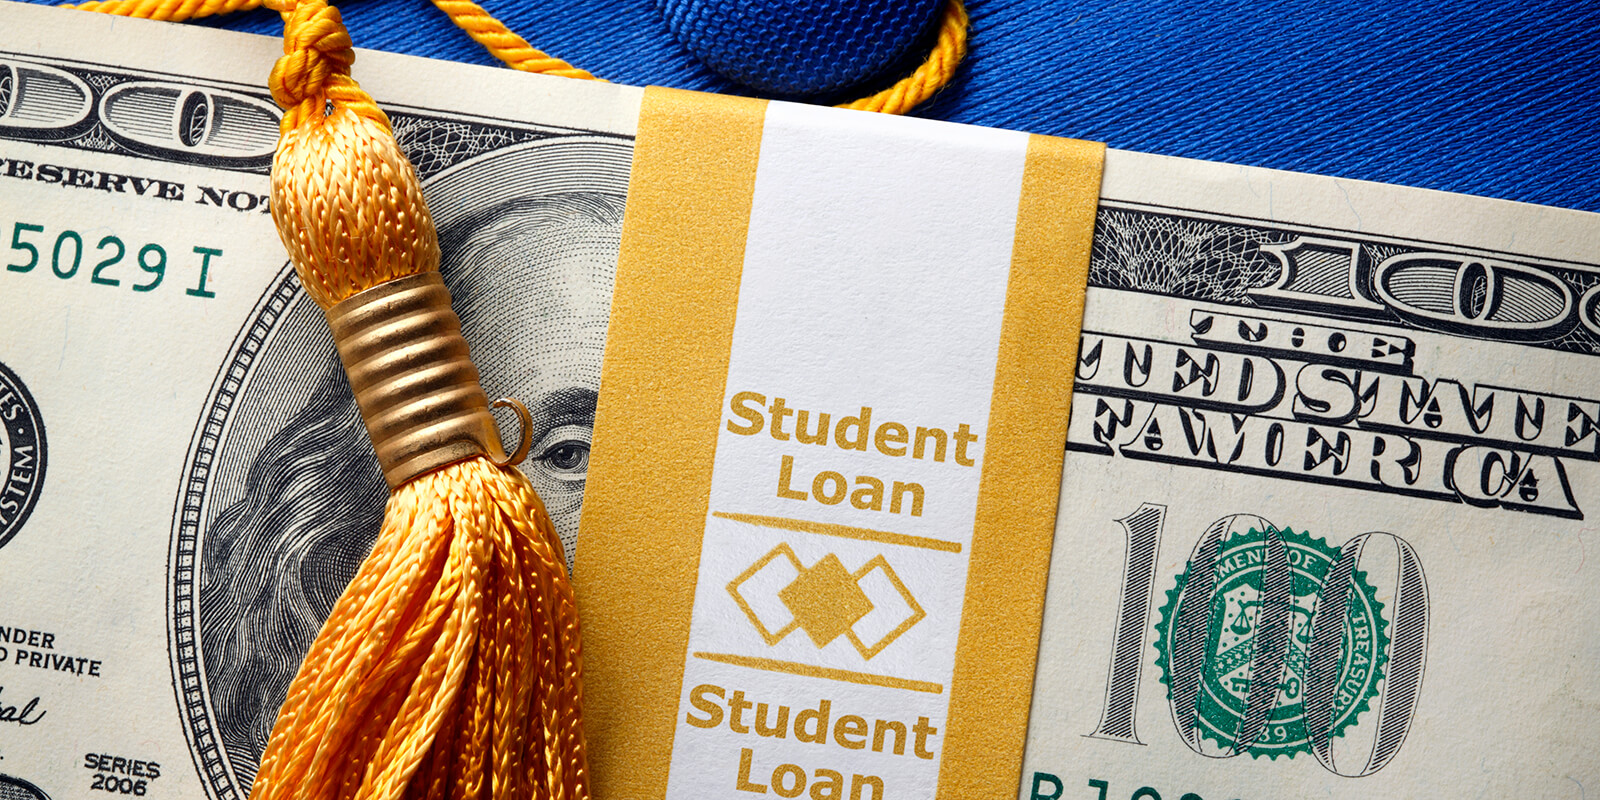 Almost $200,000 in student loan debt forgiven for DC 37 member thanks to PSLF waiver